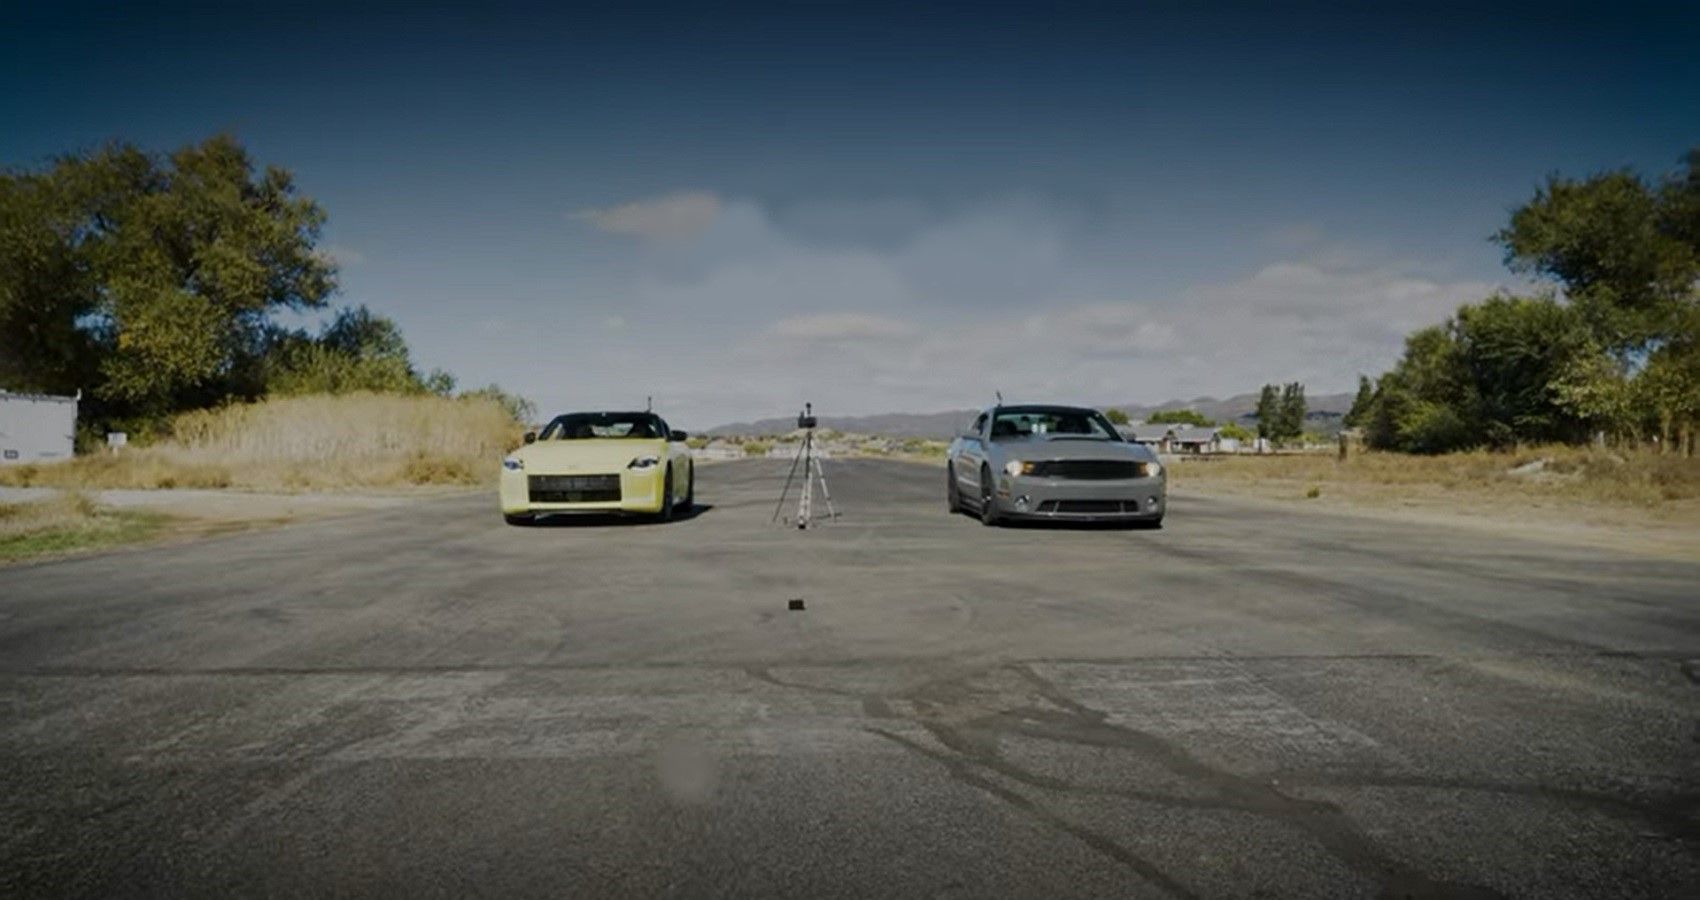 Roush stage 3 Ford Mustang vs Nissan Z drag race, at starting line